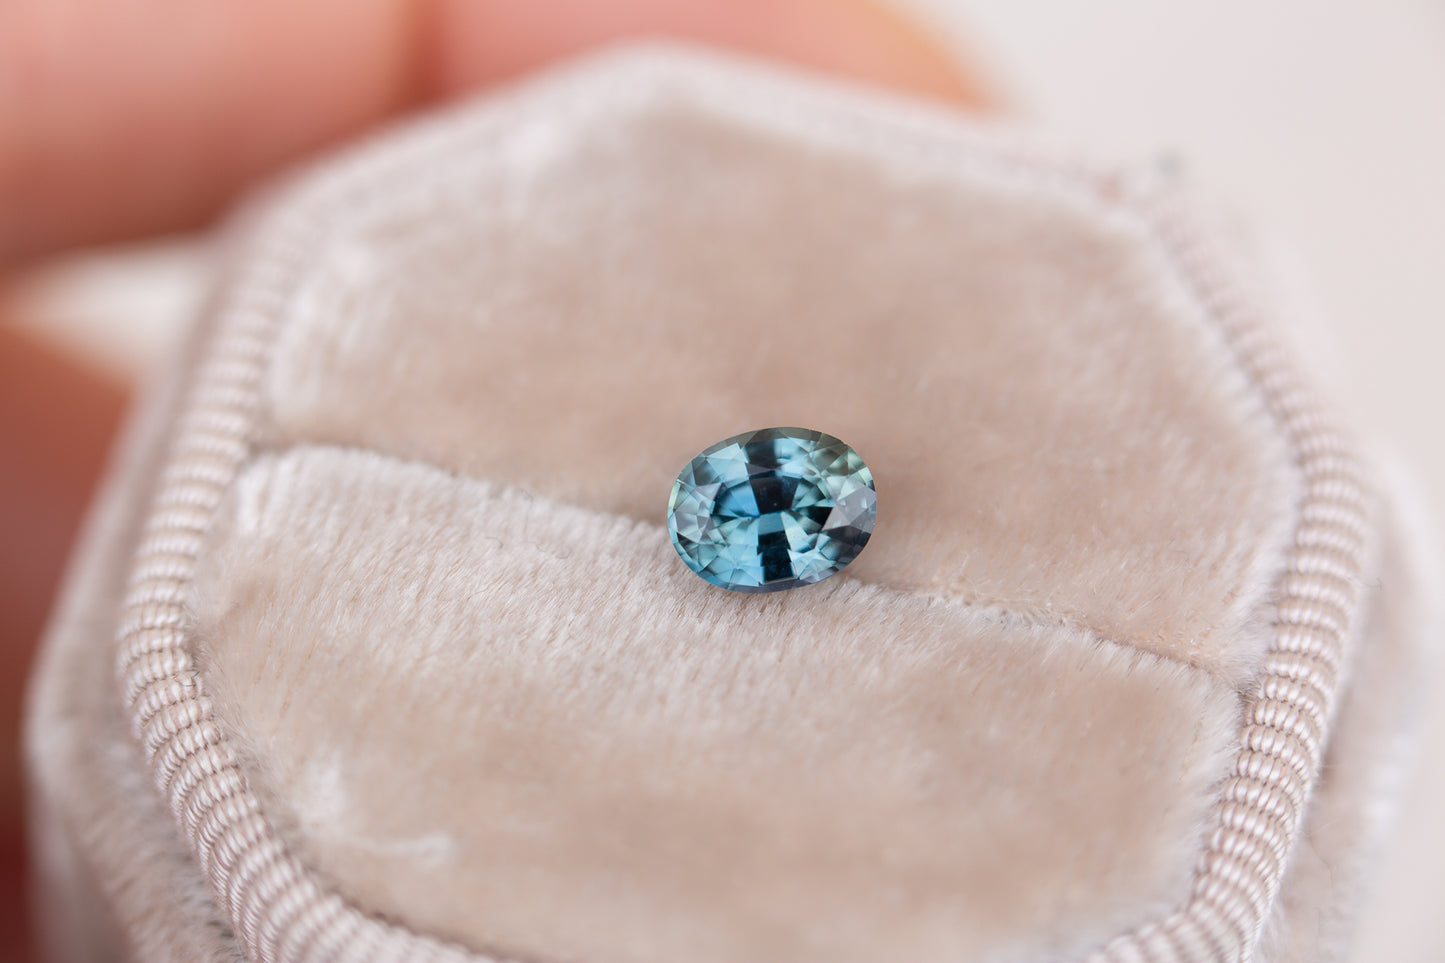 1.11ct oval blue green sapphire